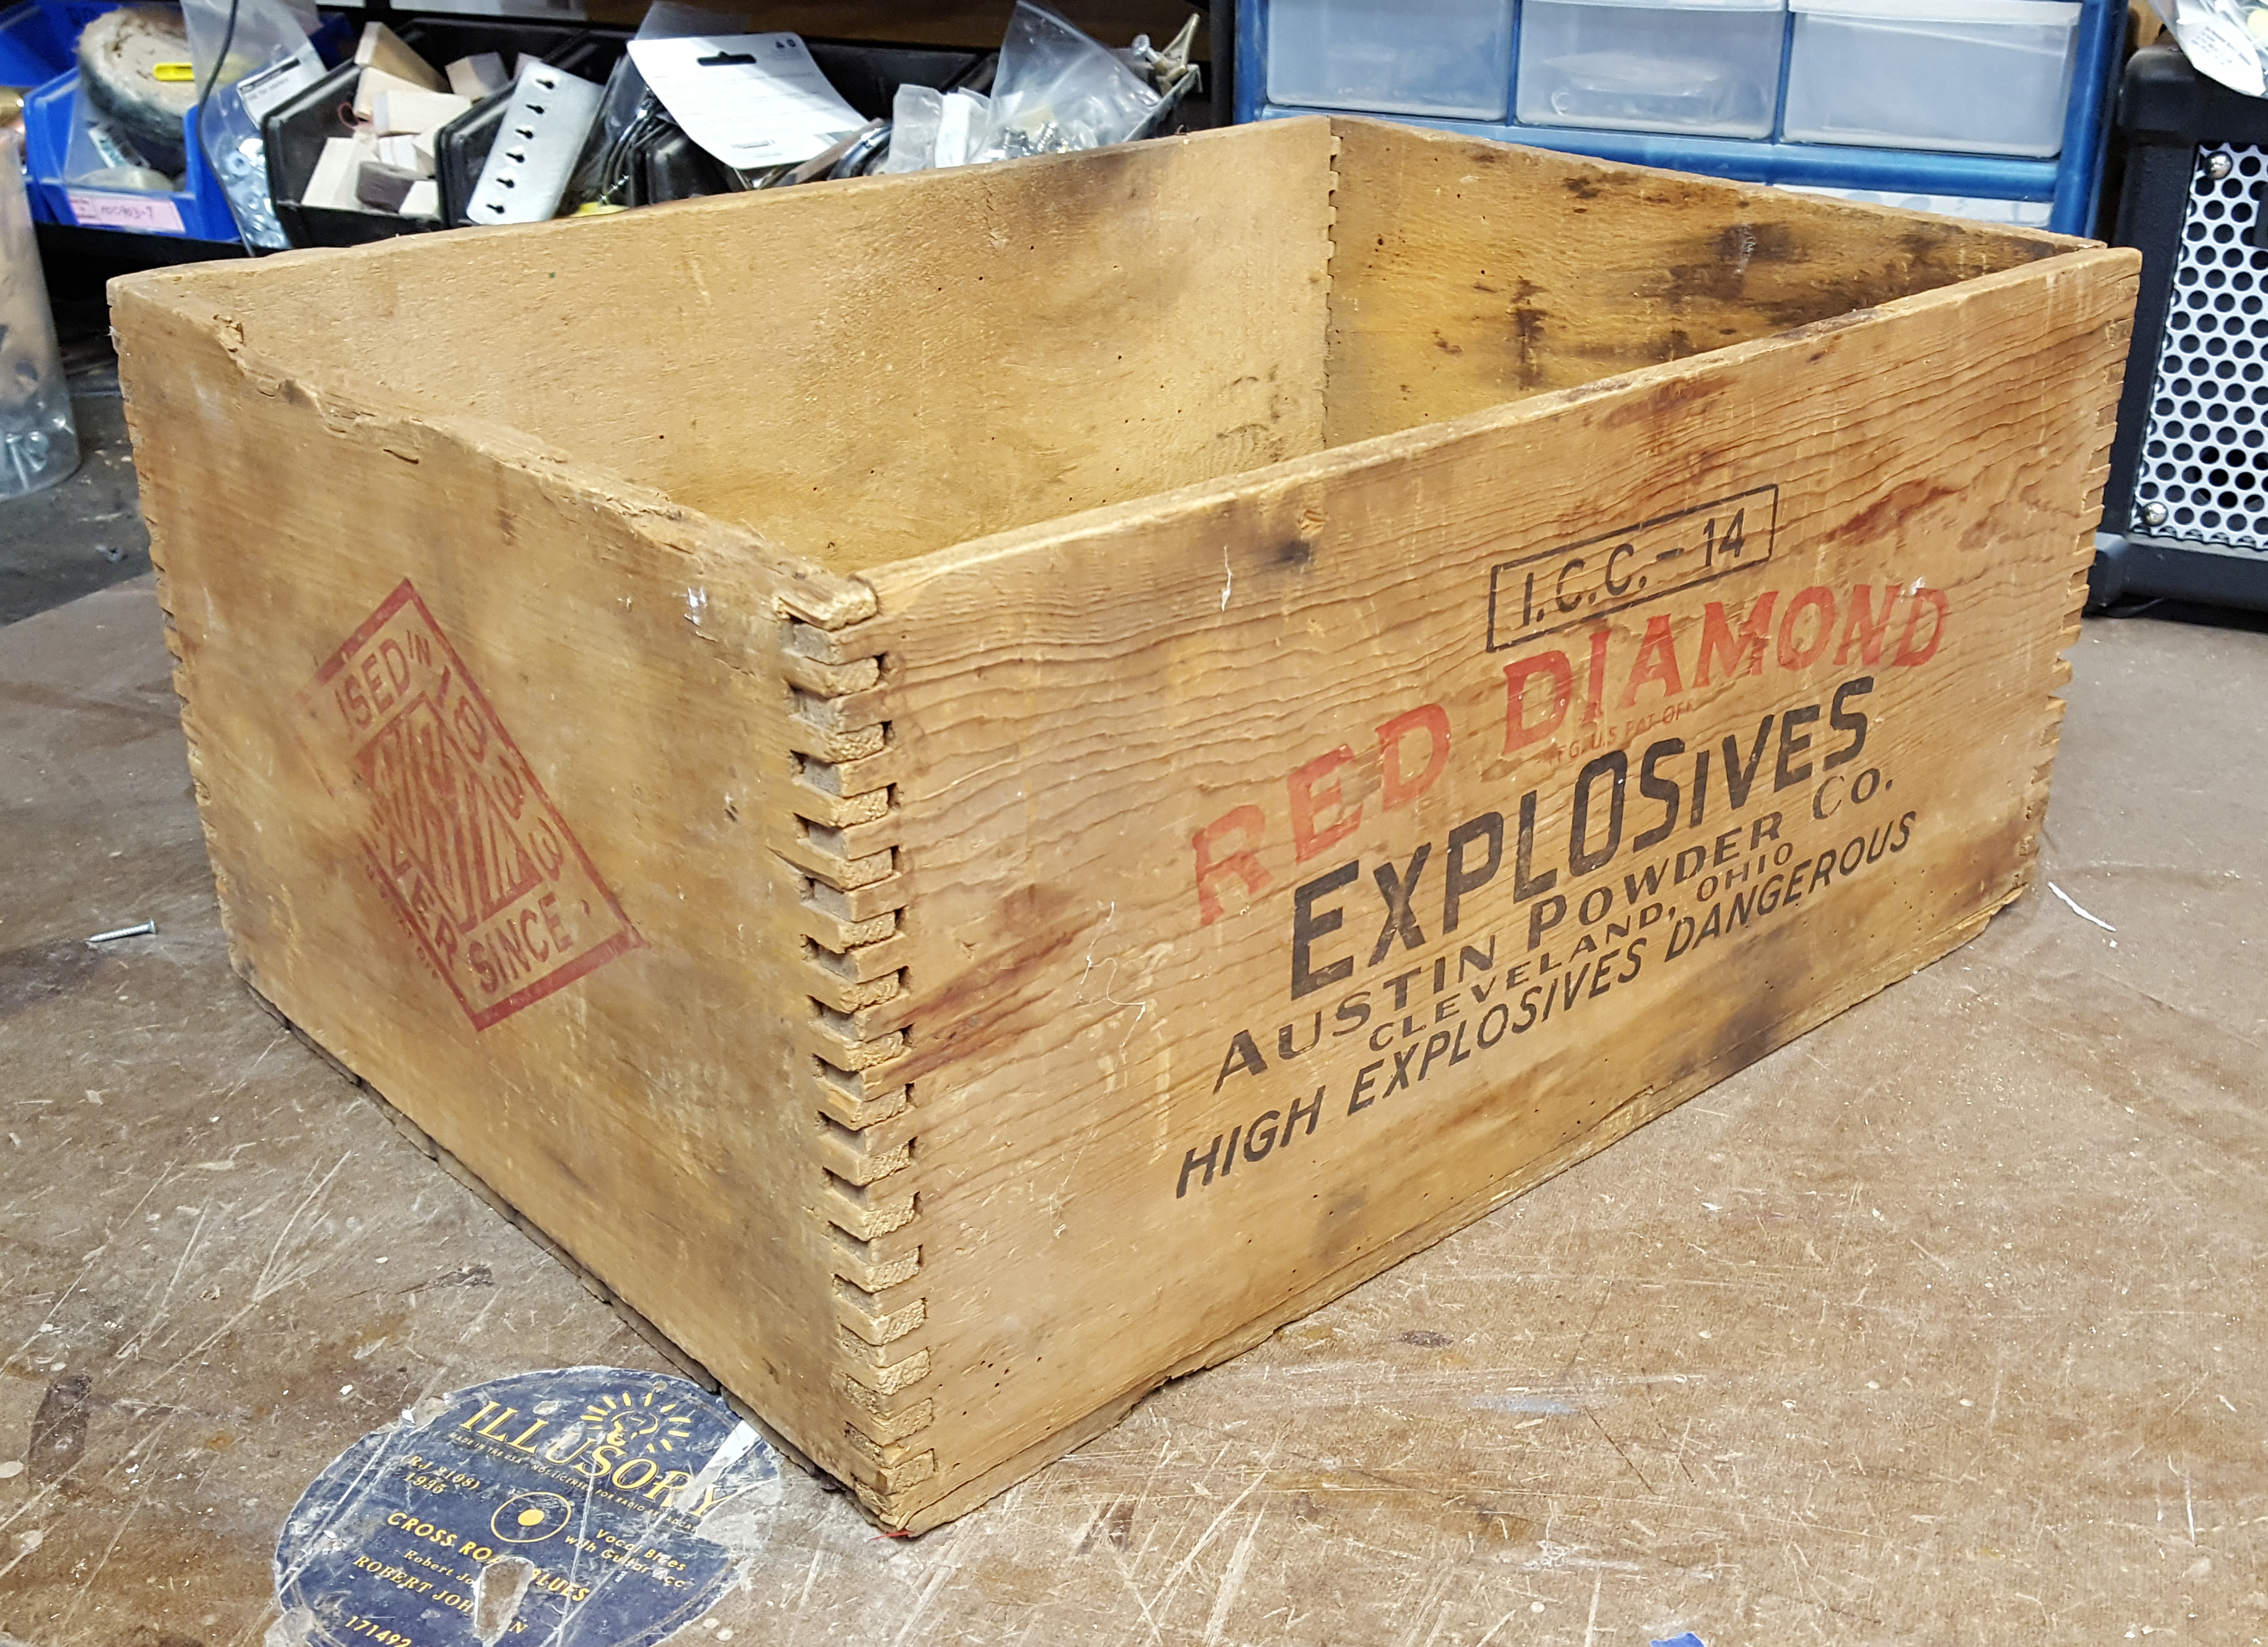 The starting point - an old explosives crate